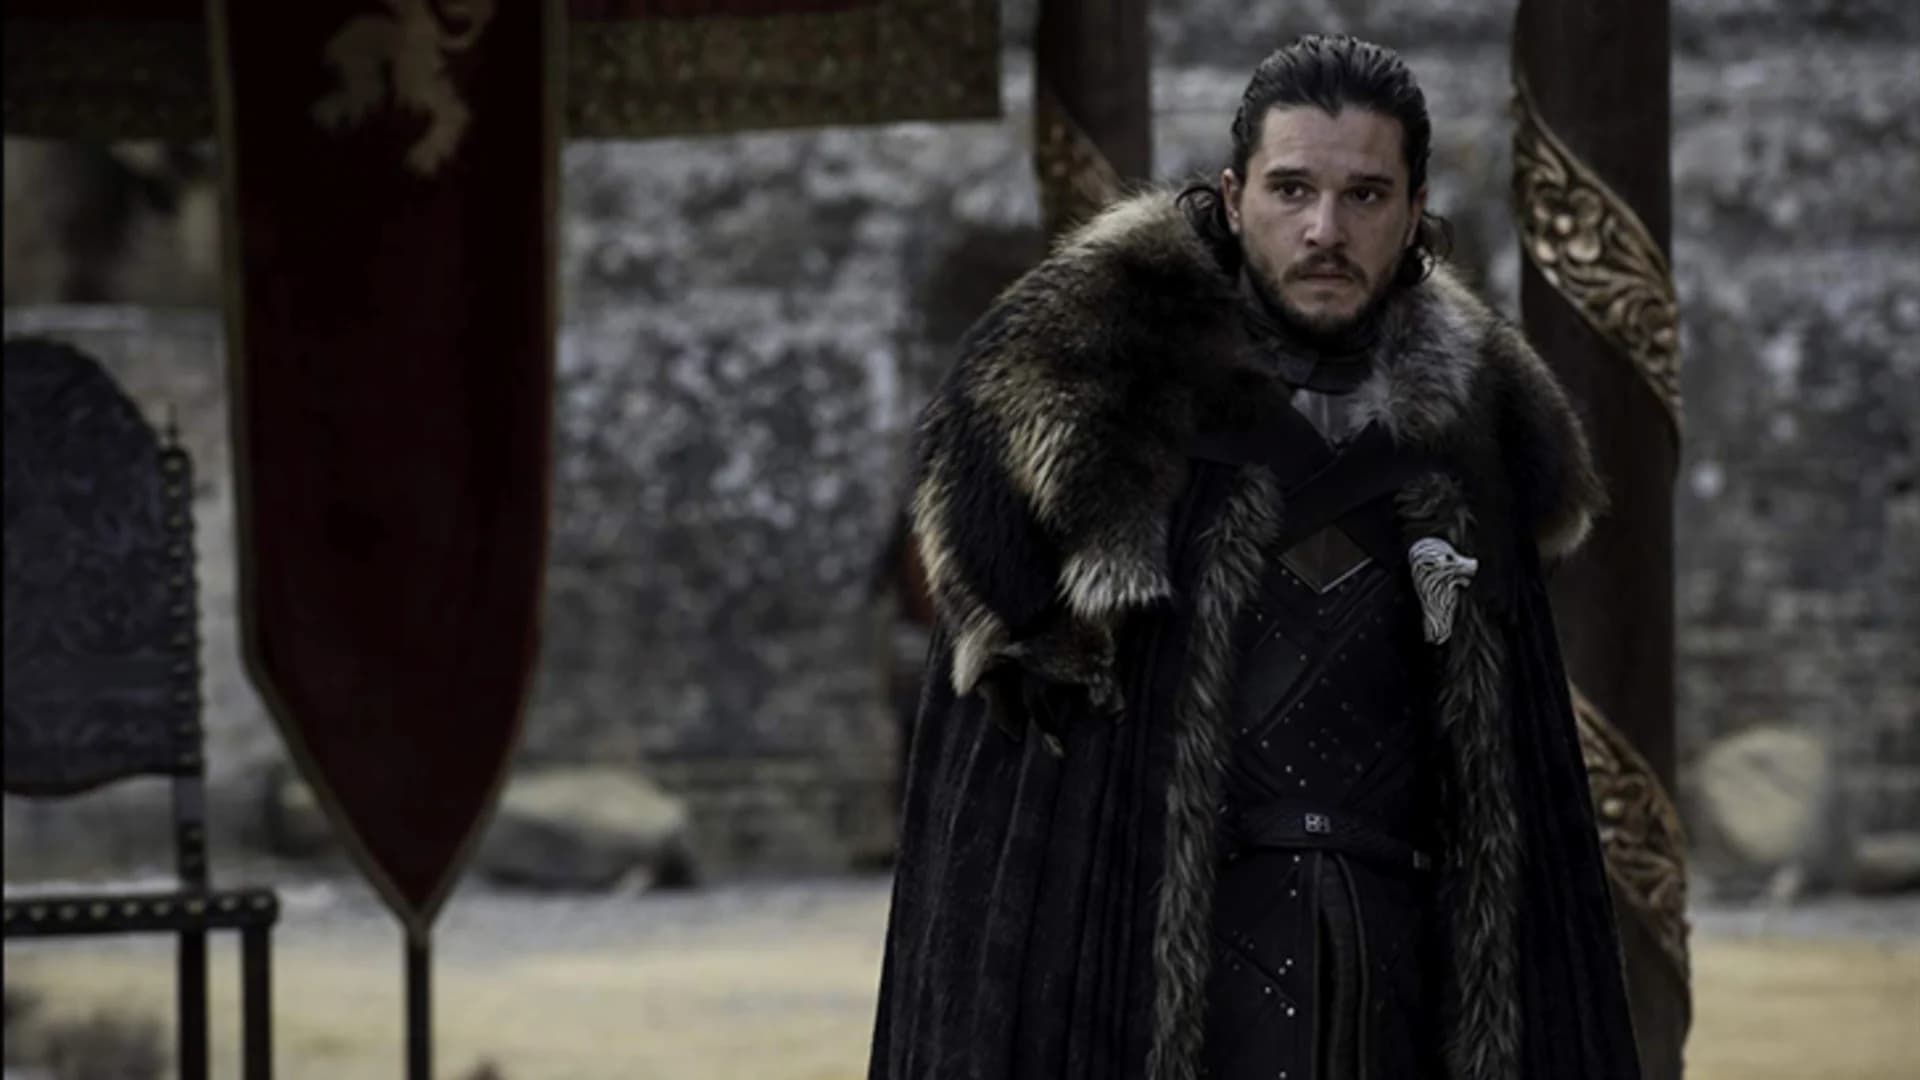 Petition to redo ‘Game of Thrones’ final season approaches 1 million signatures